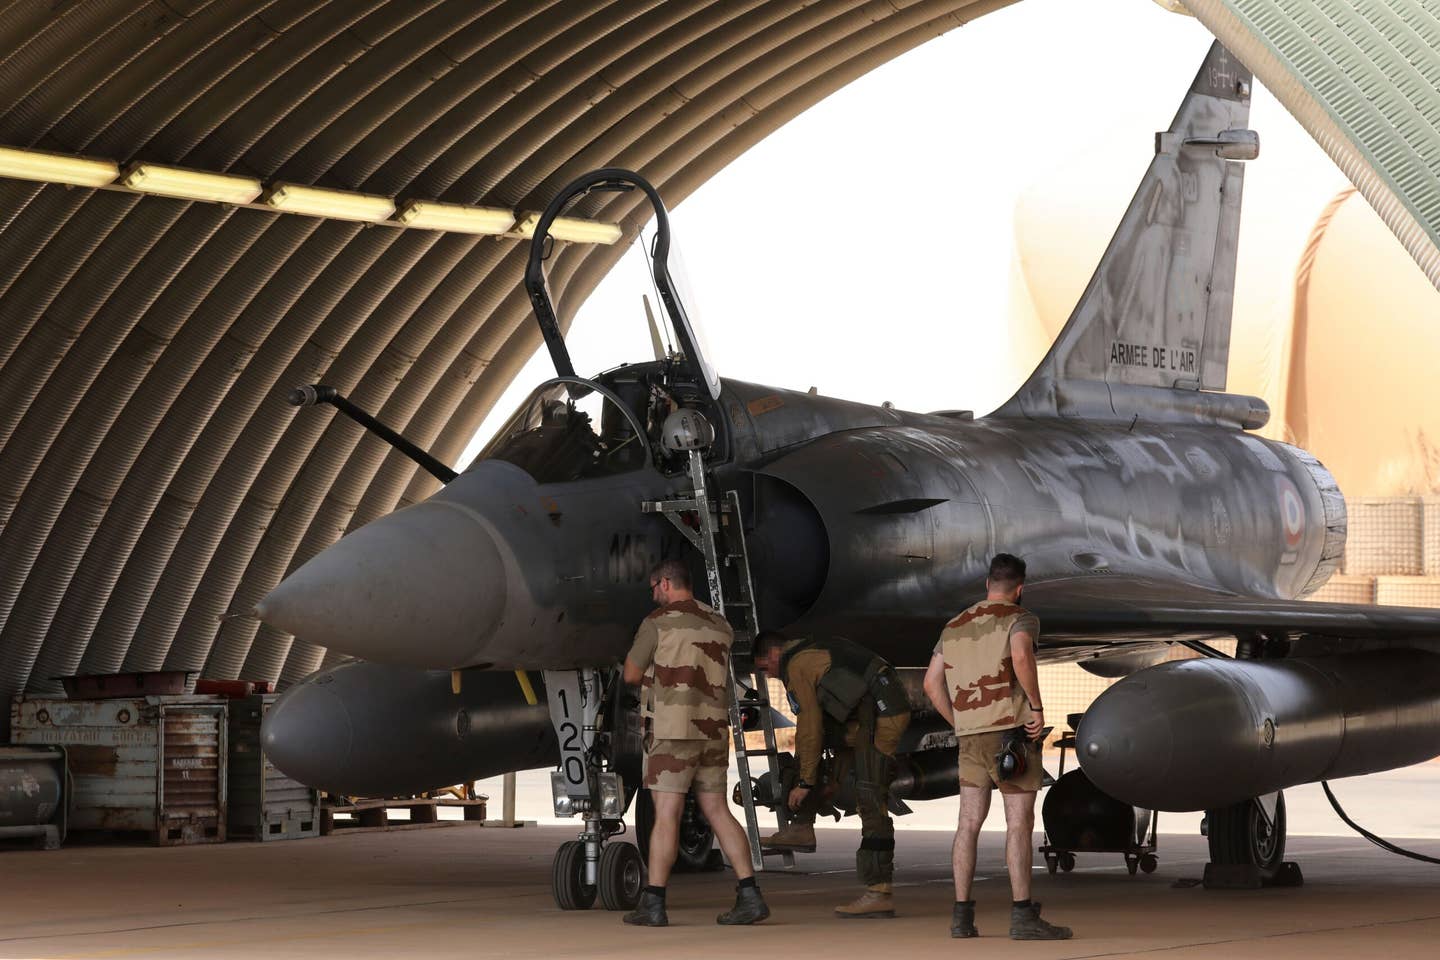 A French Air Force pilot boards a Mirage 2000 aircraft, as the ground crew prepares the jet to take off from the French airbase in Niamey, Niger, in 2017. <em>LUDOVIC MARIN/AFP via Getty Images</em>